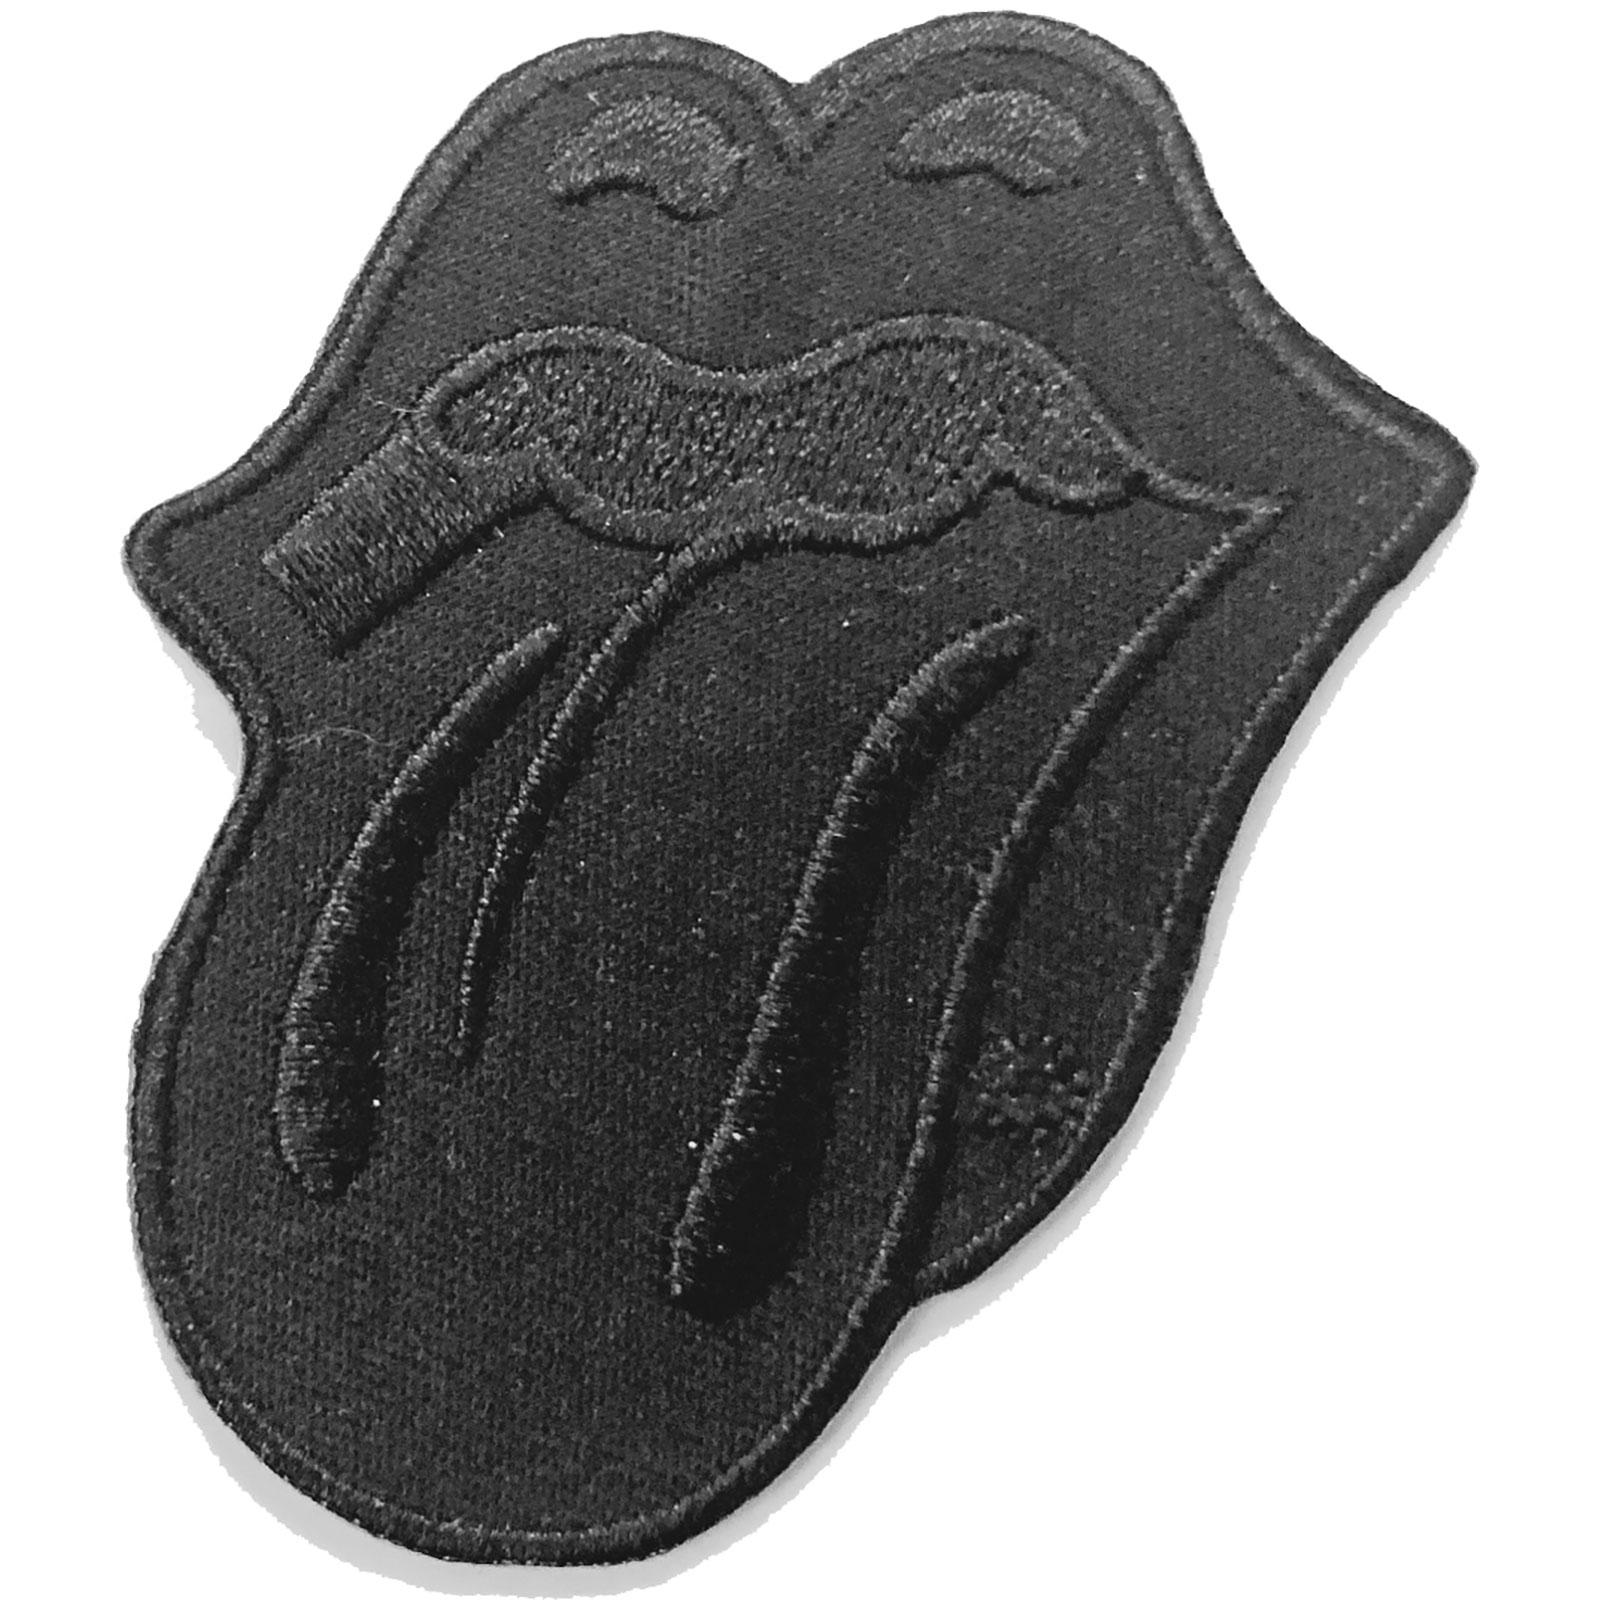 THE ROLLING STONES Classic Tongue Black